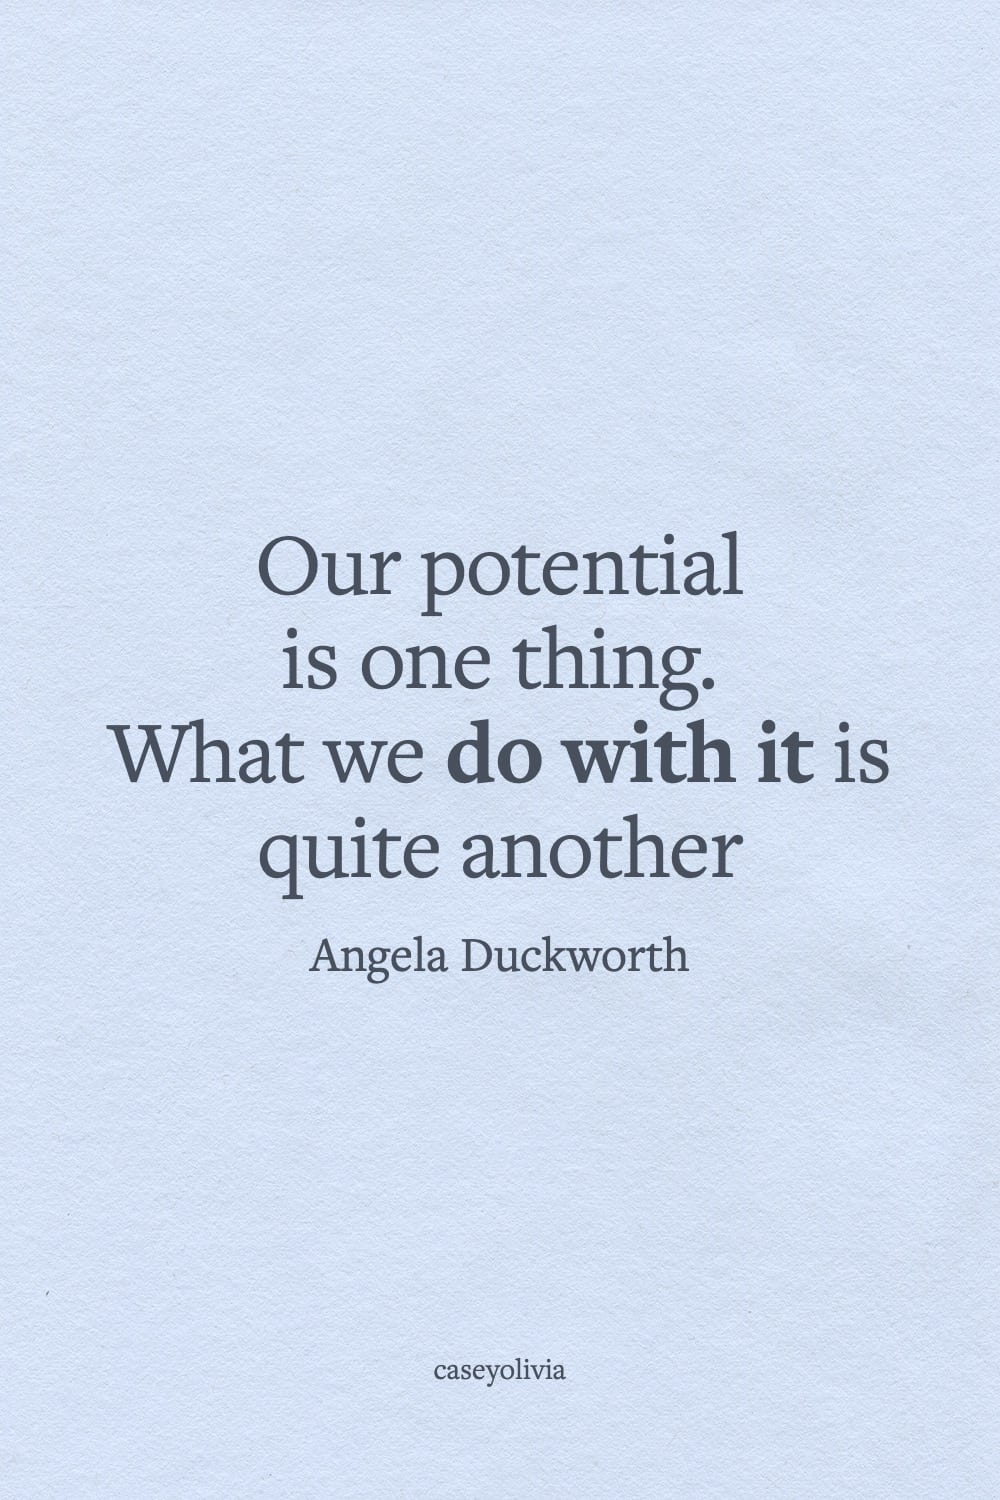 angela duckworth what we do with our potential caption